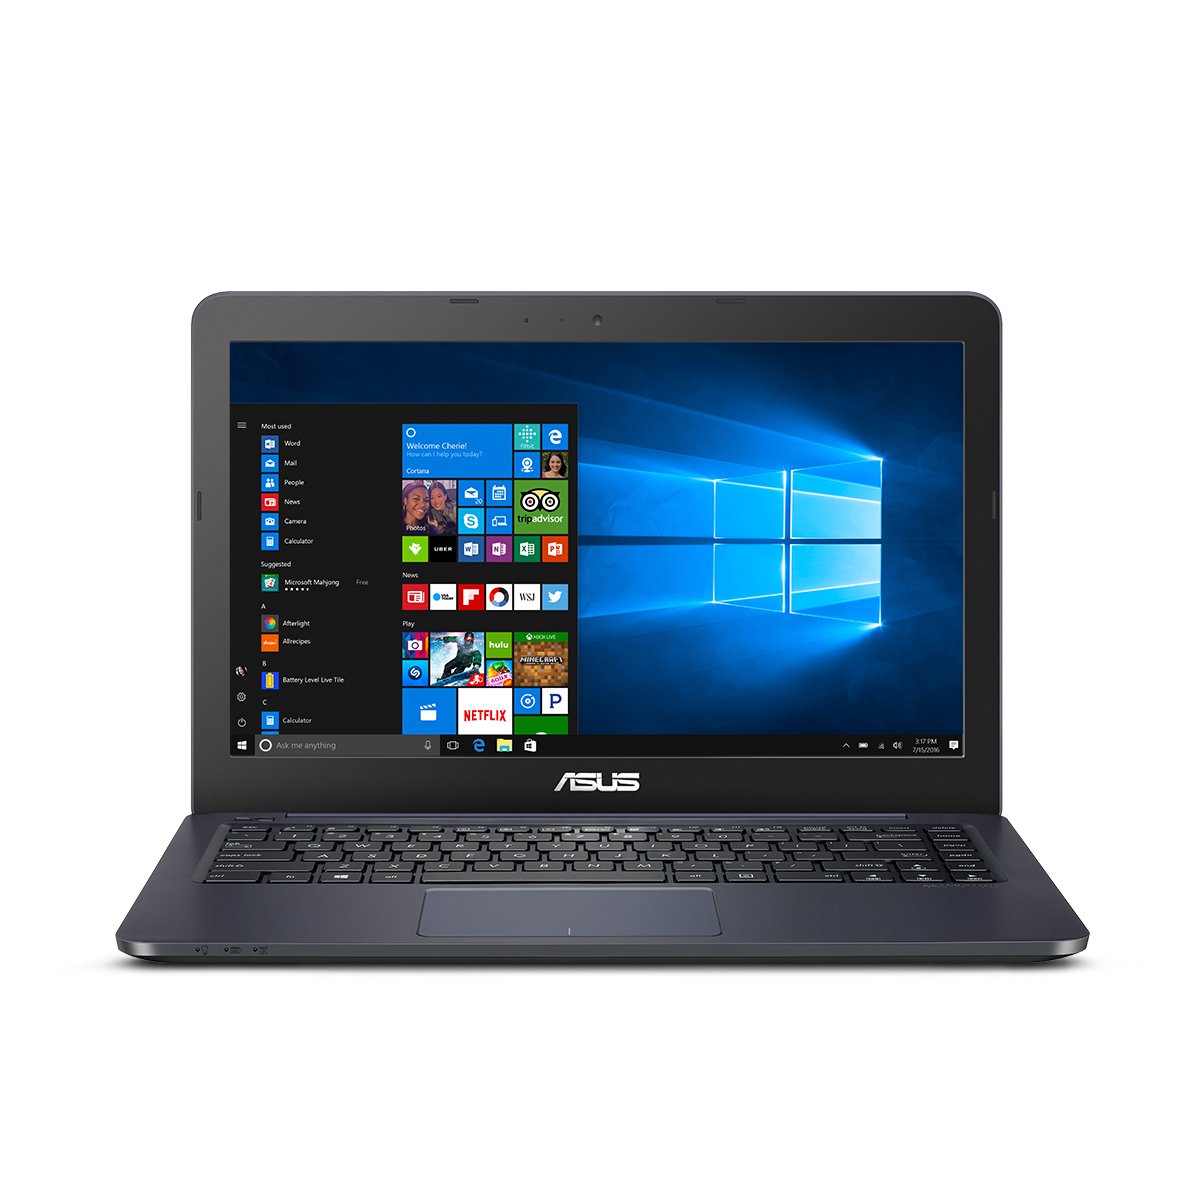 ASUS L402SA Portable Lightweight Laptop PC, Intel Dual Core Processor, 4GB RAM, 32GB Flash Storage with Windows 10 with 1 Year Microsoft Office 365...